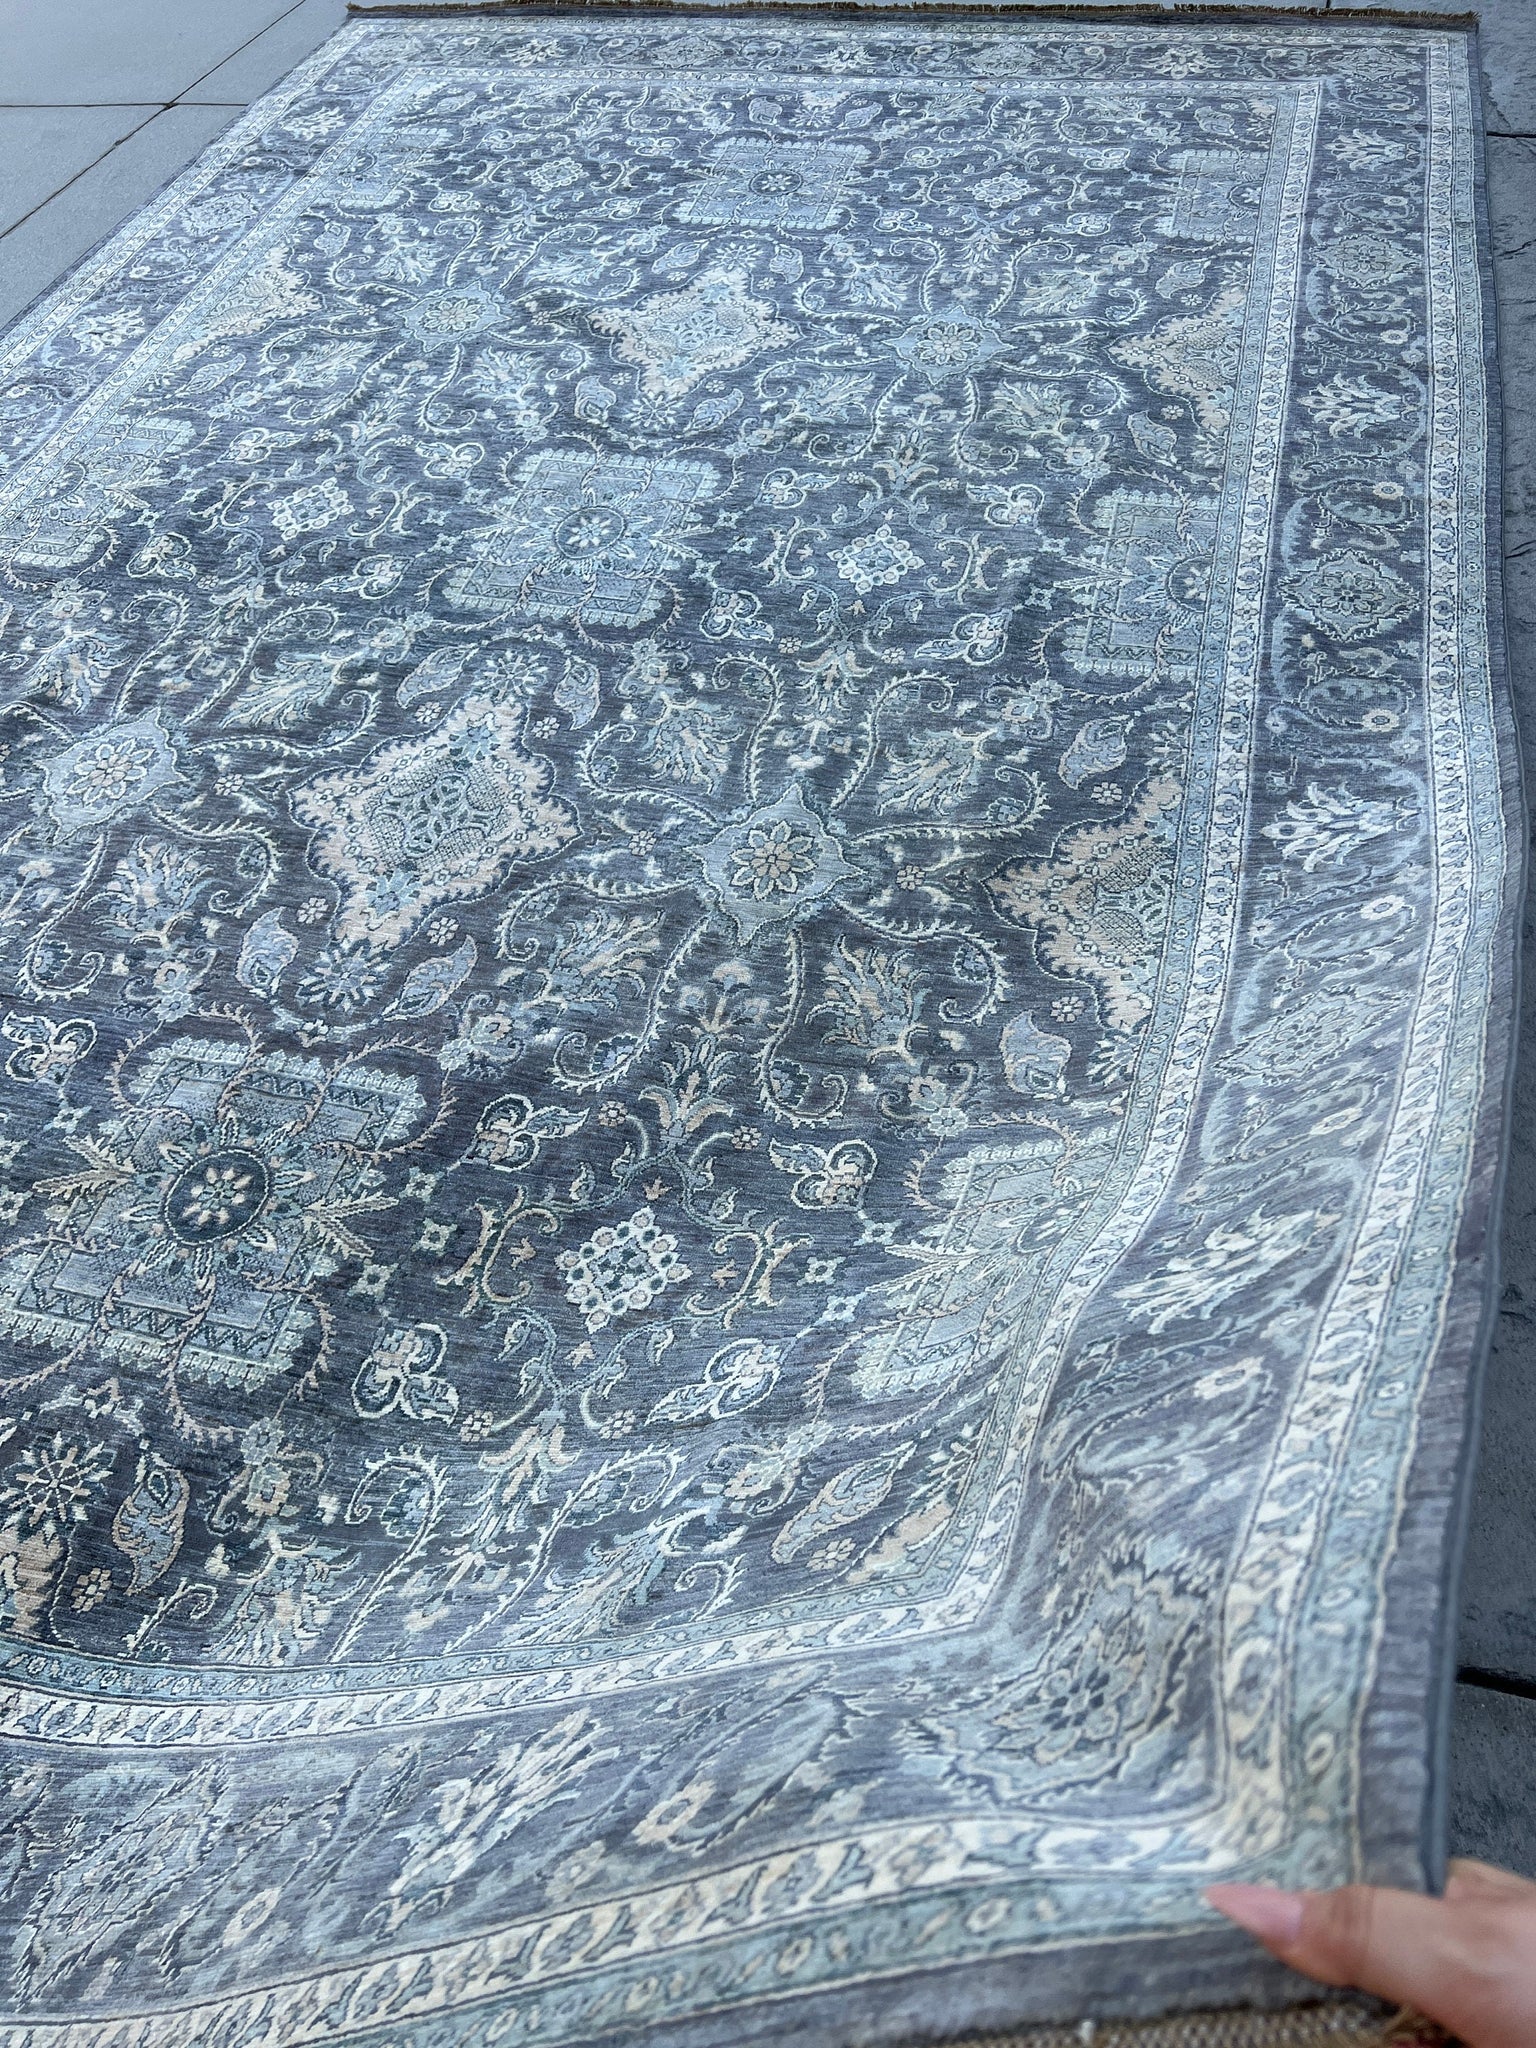 8x13 (245x400) Handmade Afghan Rug | Charcoal Grey Gray Teal Ivory  | Hand Knotted Turkish Oriental Persian